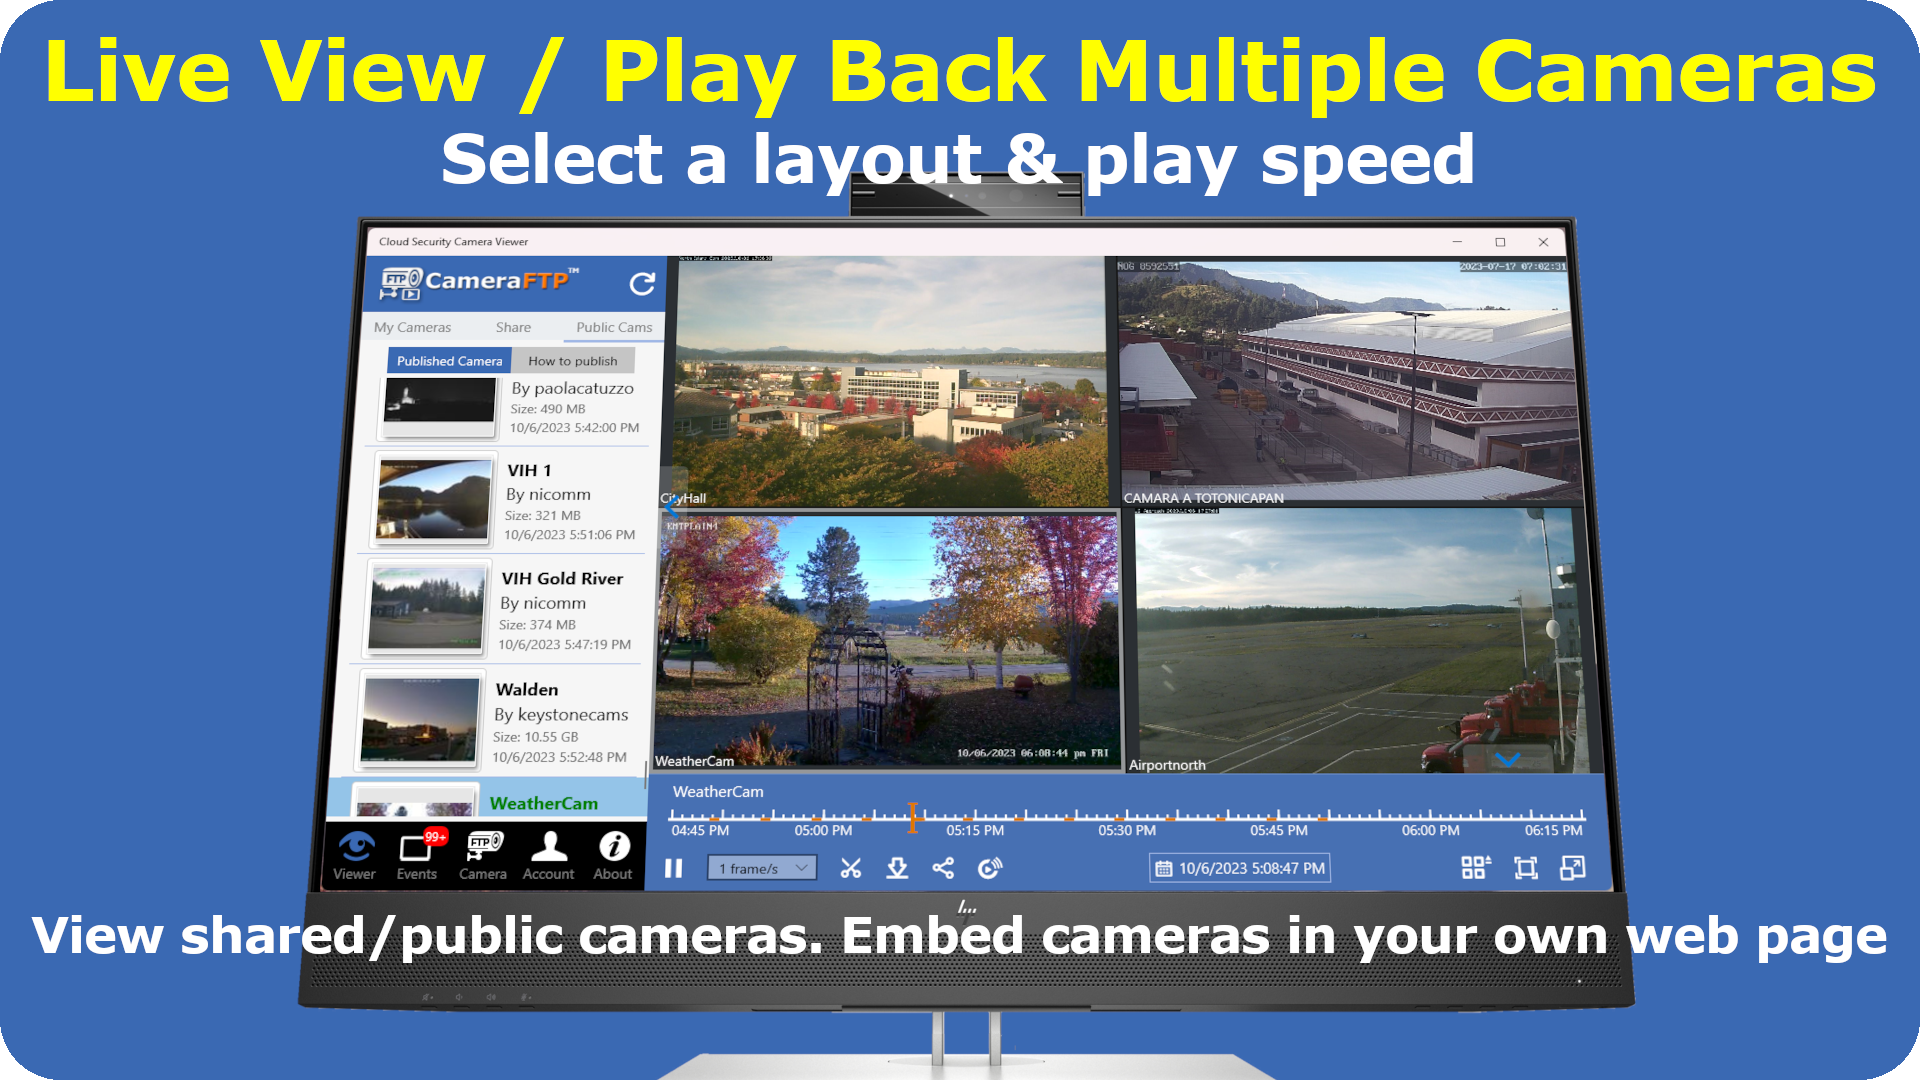 View multiple cameras in one screen. View public cameras and embed cameras in your own web page